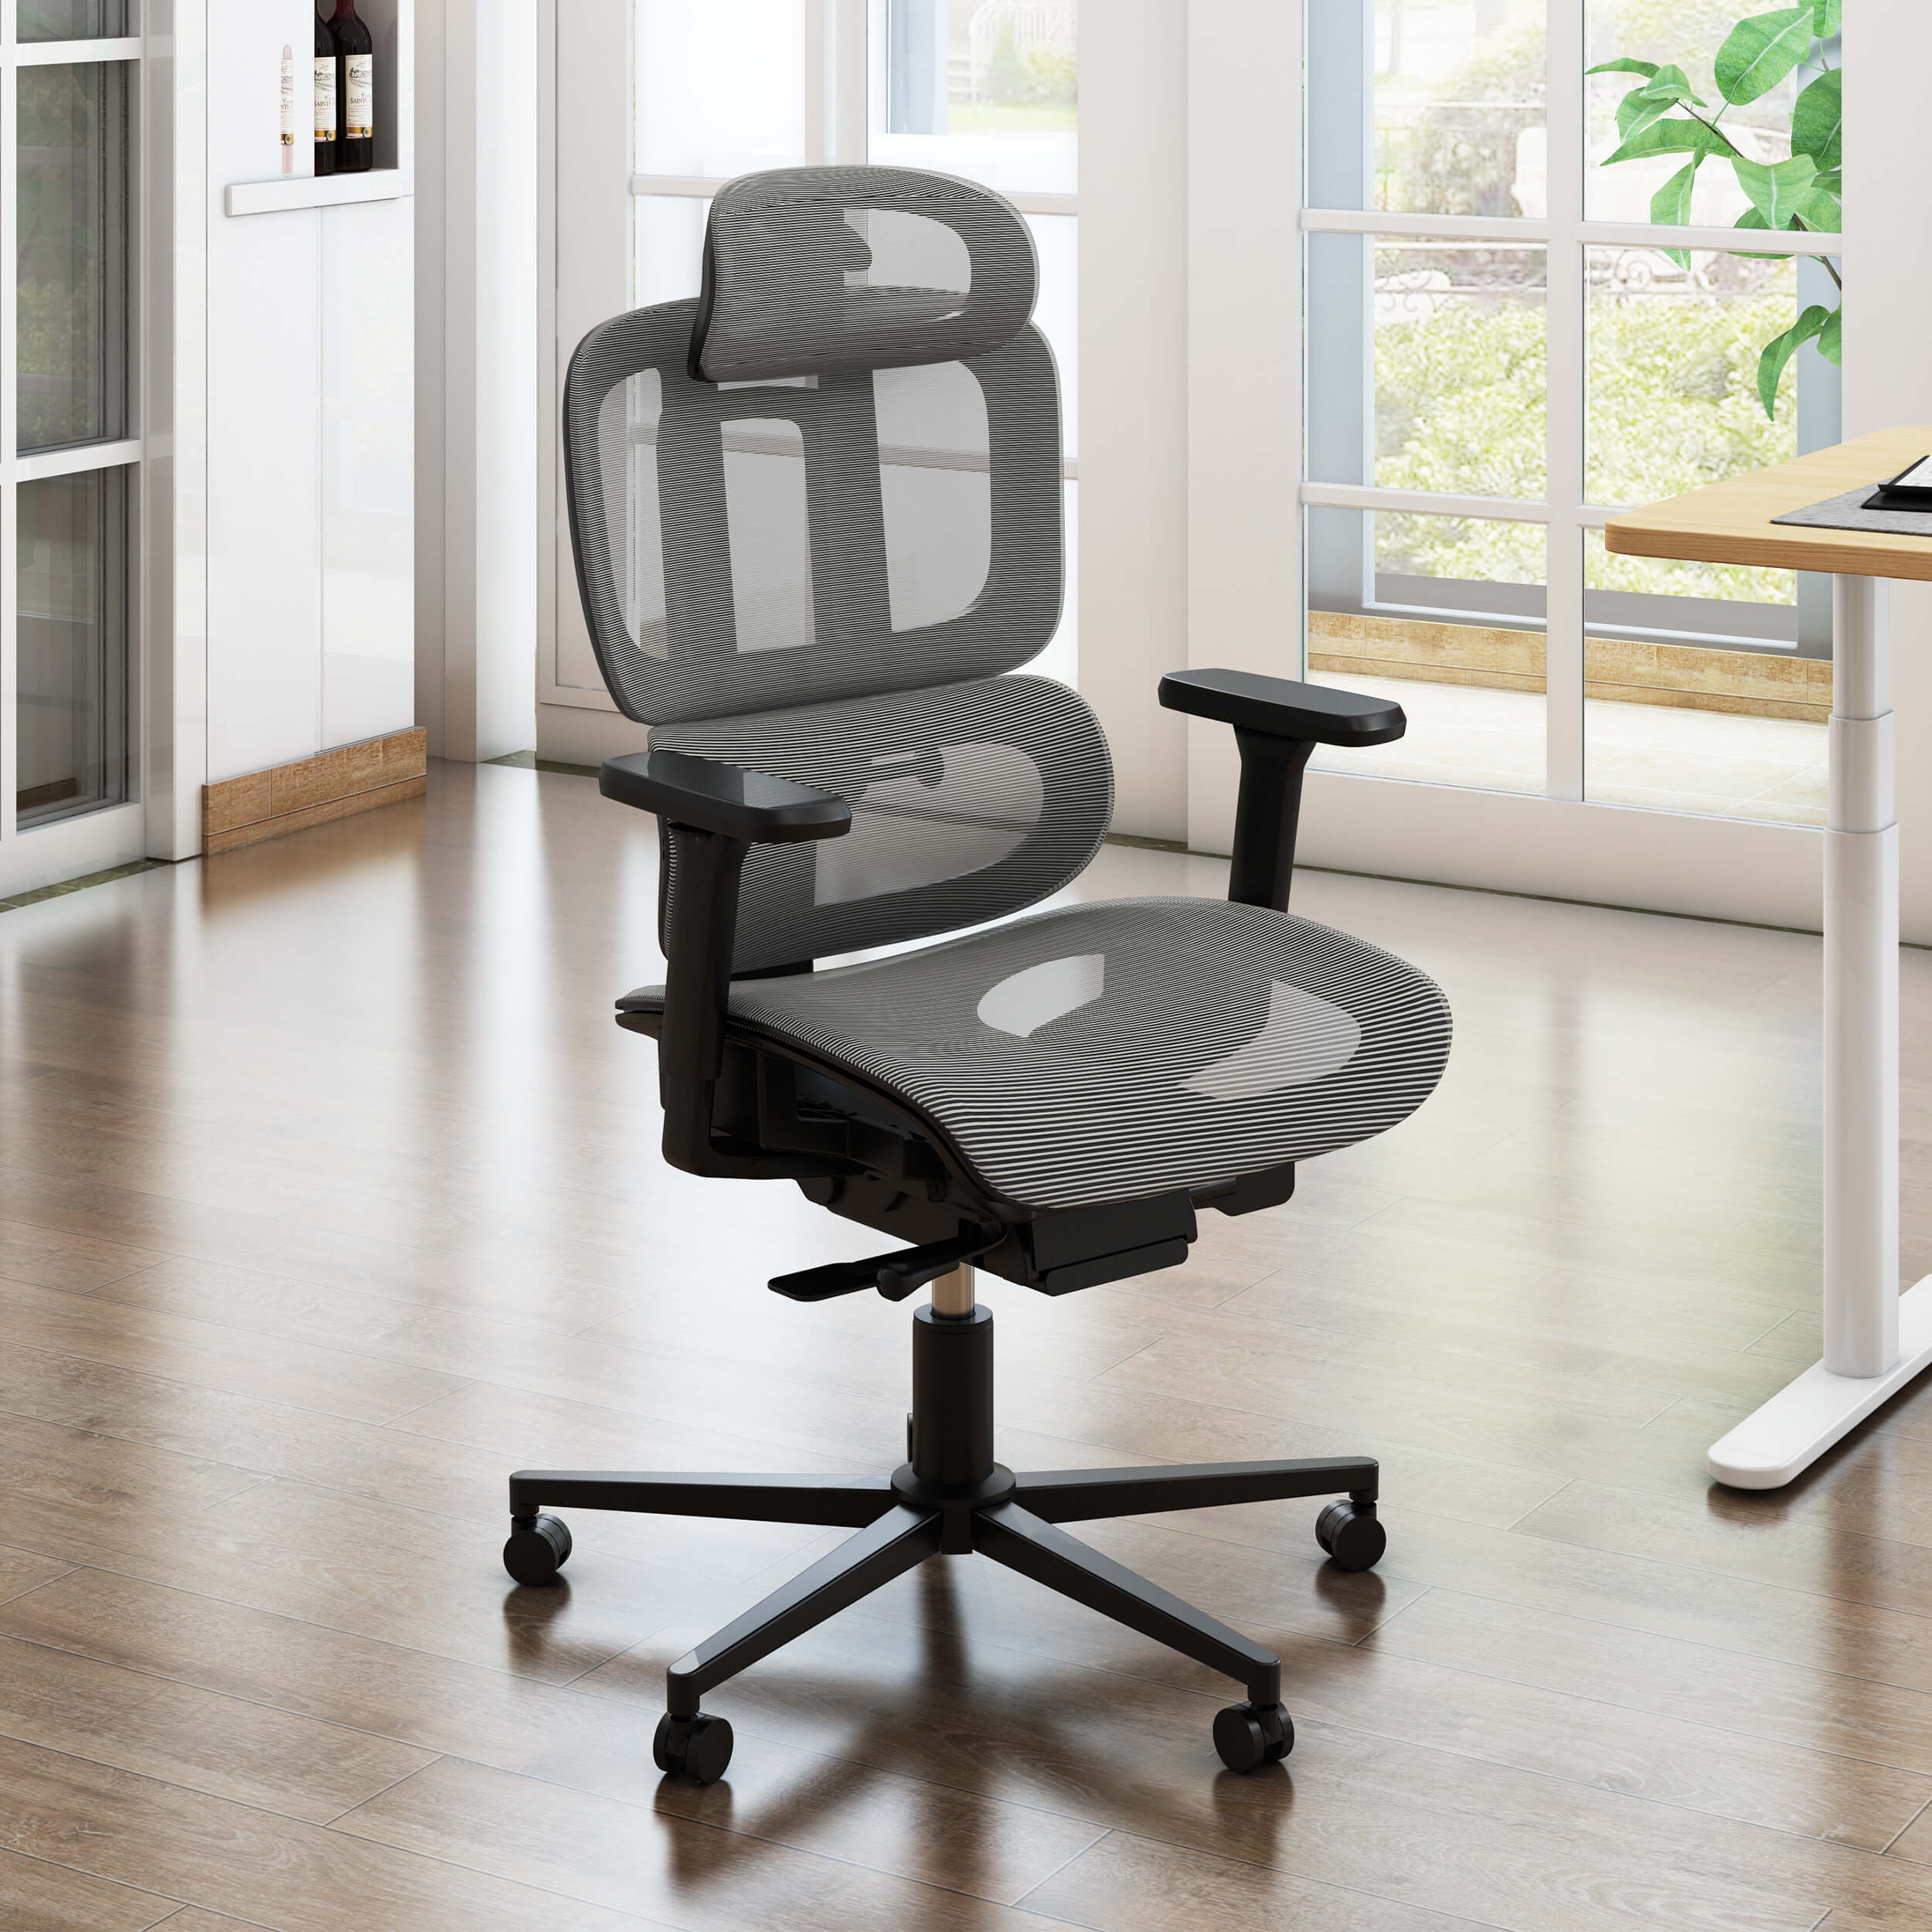 Maidesite grey comfortable office desk chair for home office